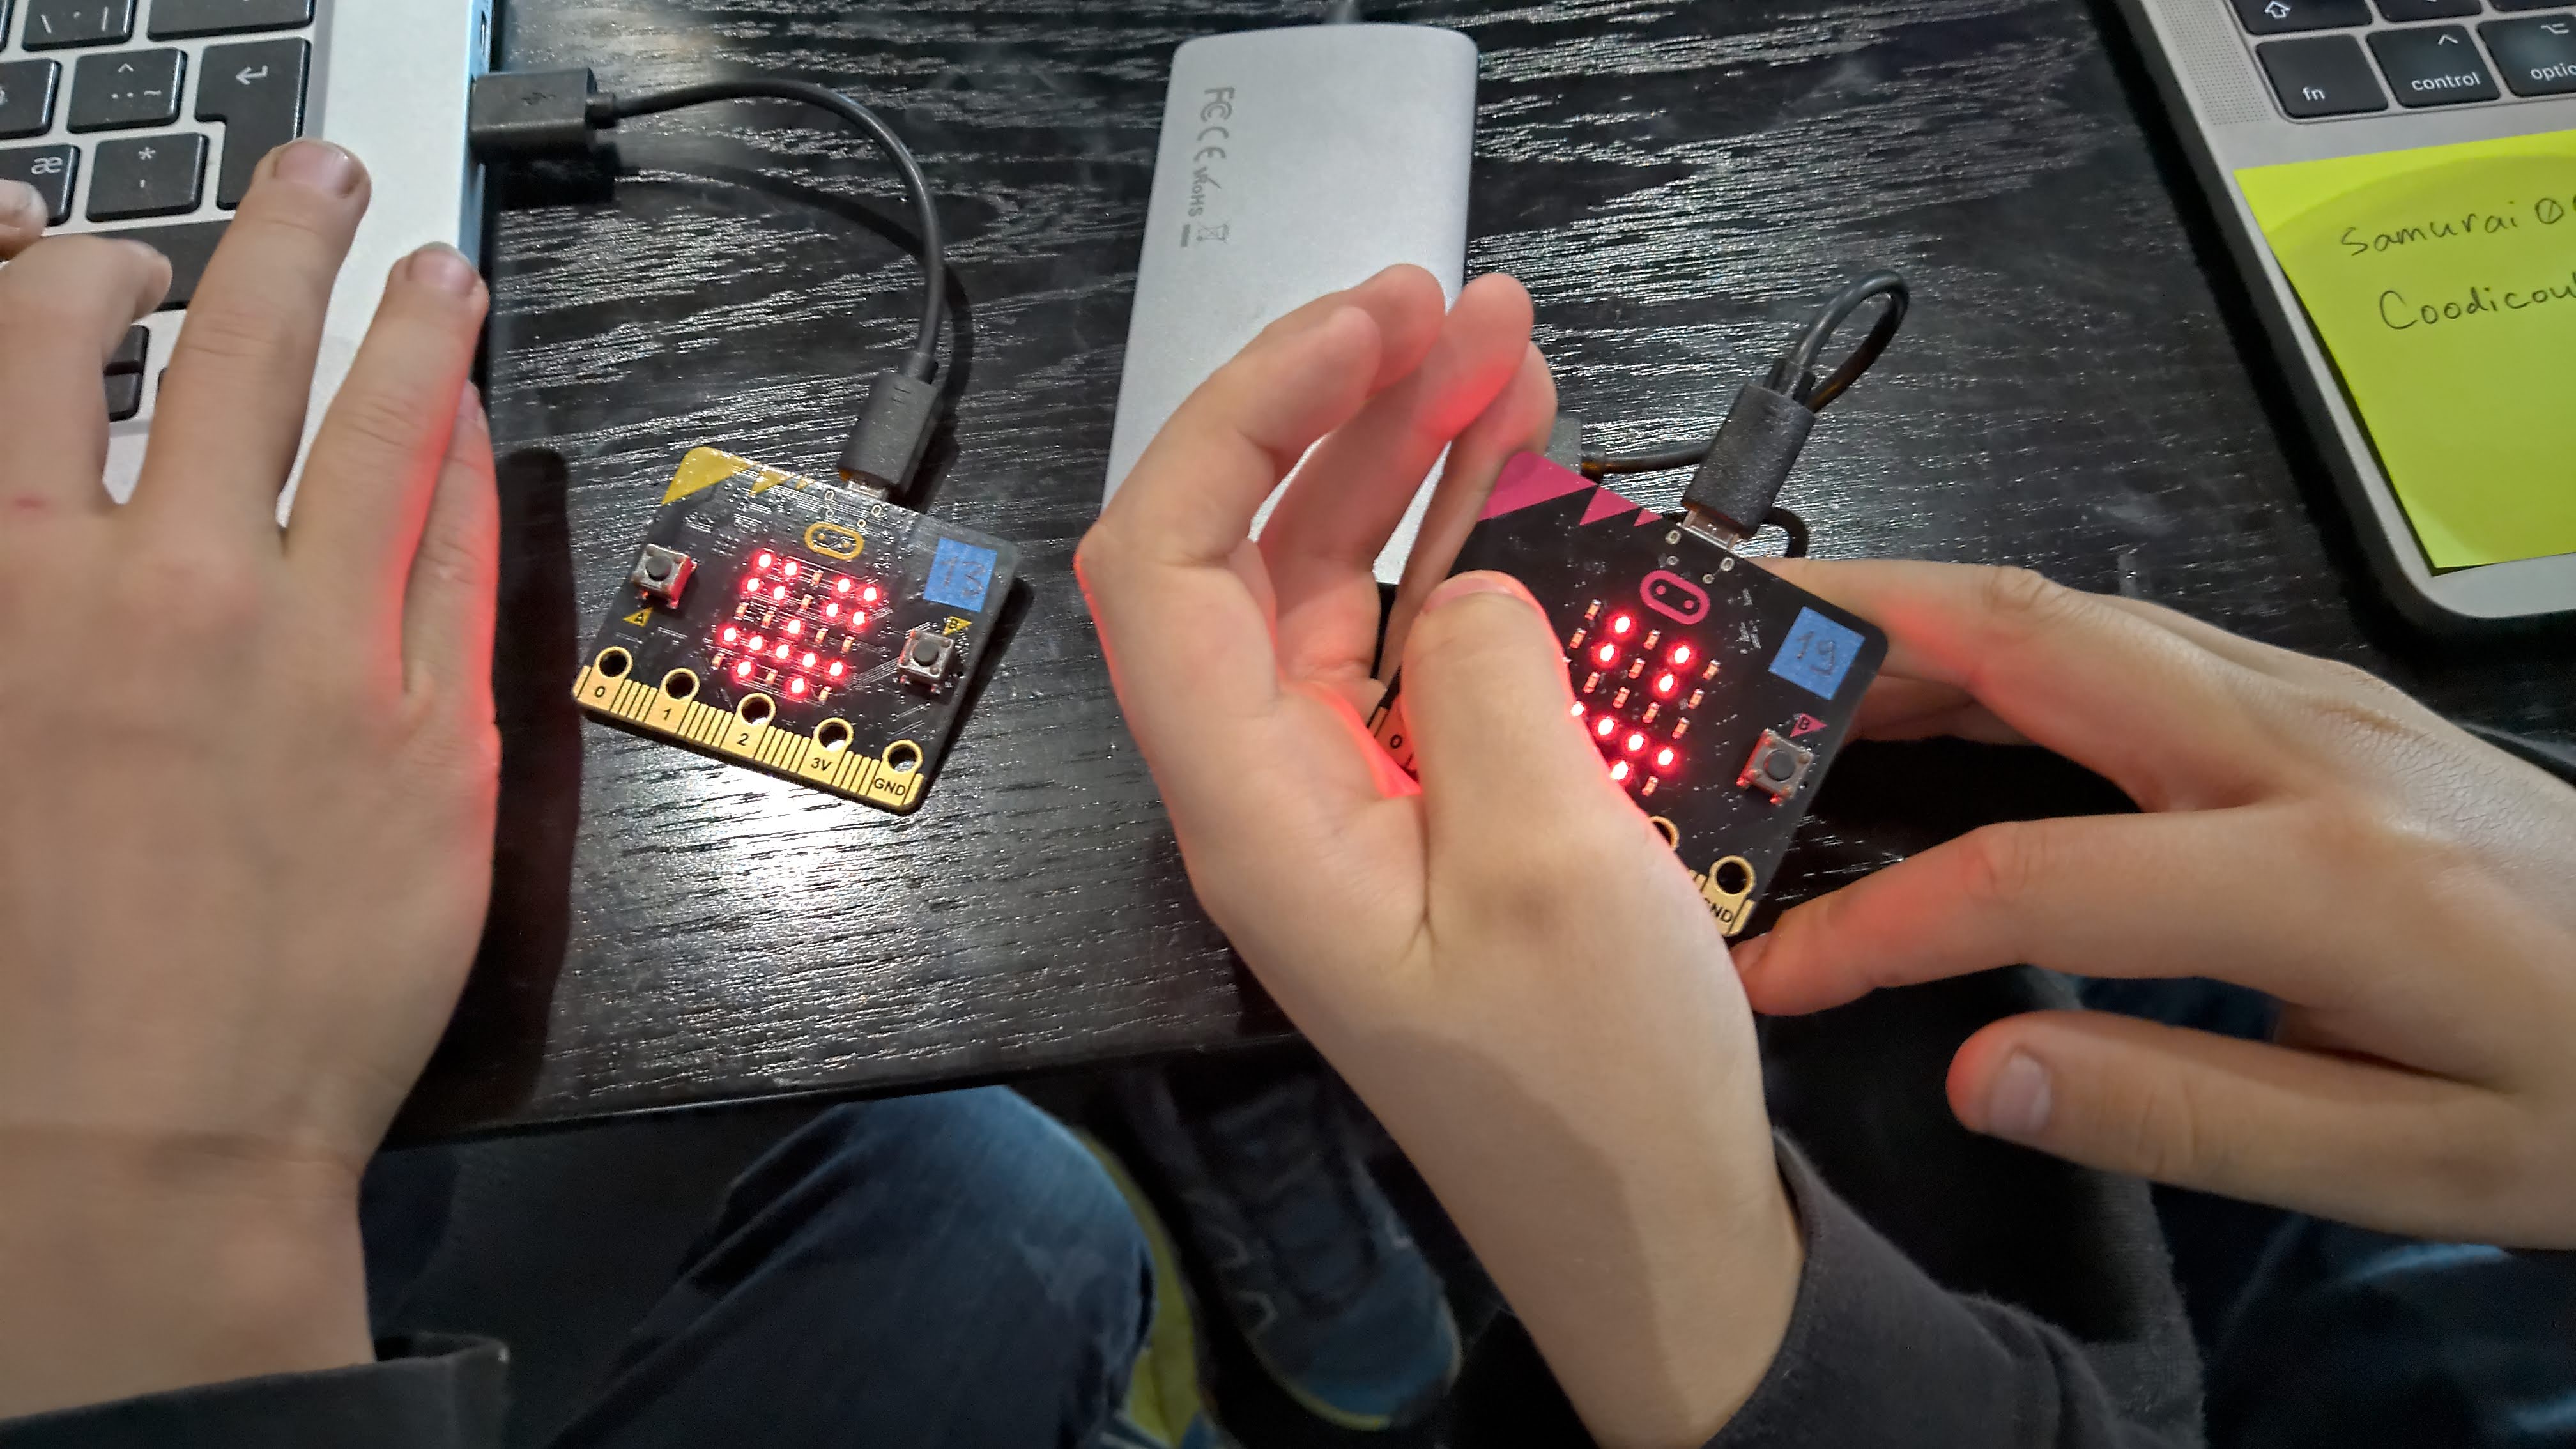 Two kids holding micro:bit computers with red illuminated led lights